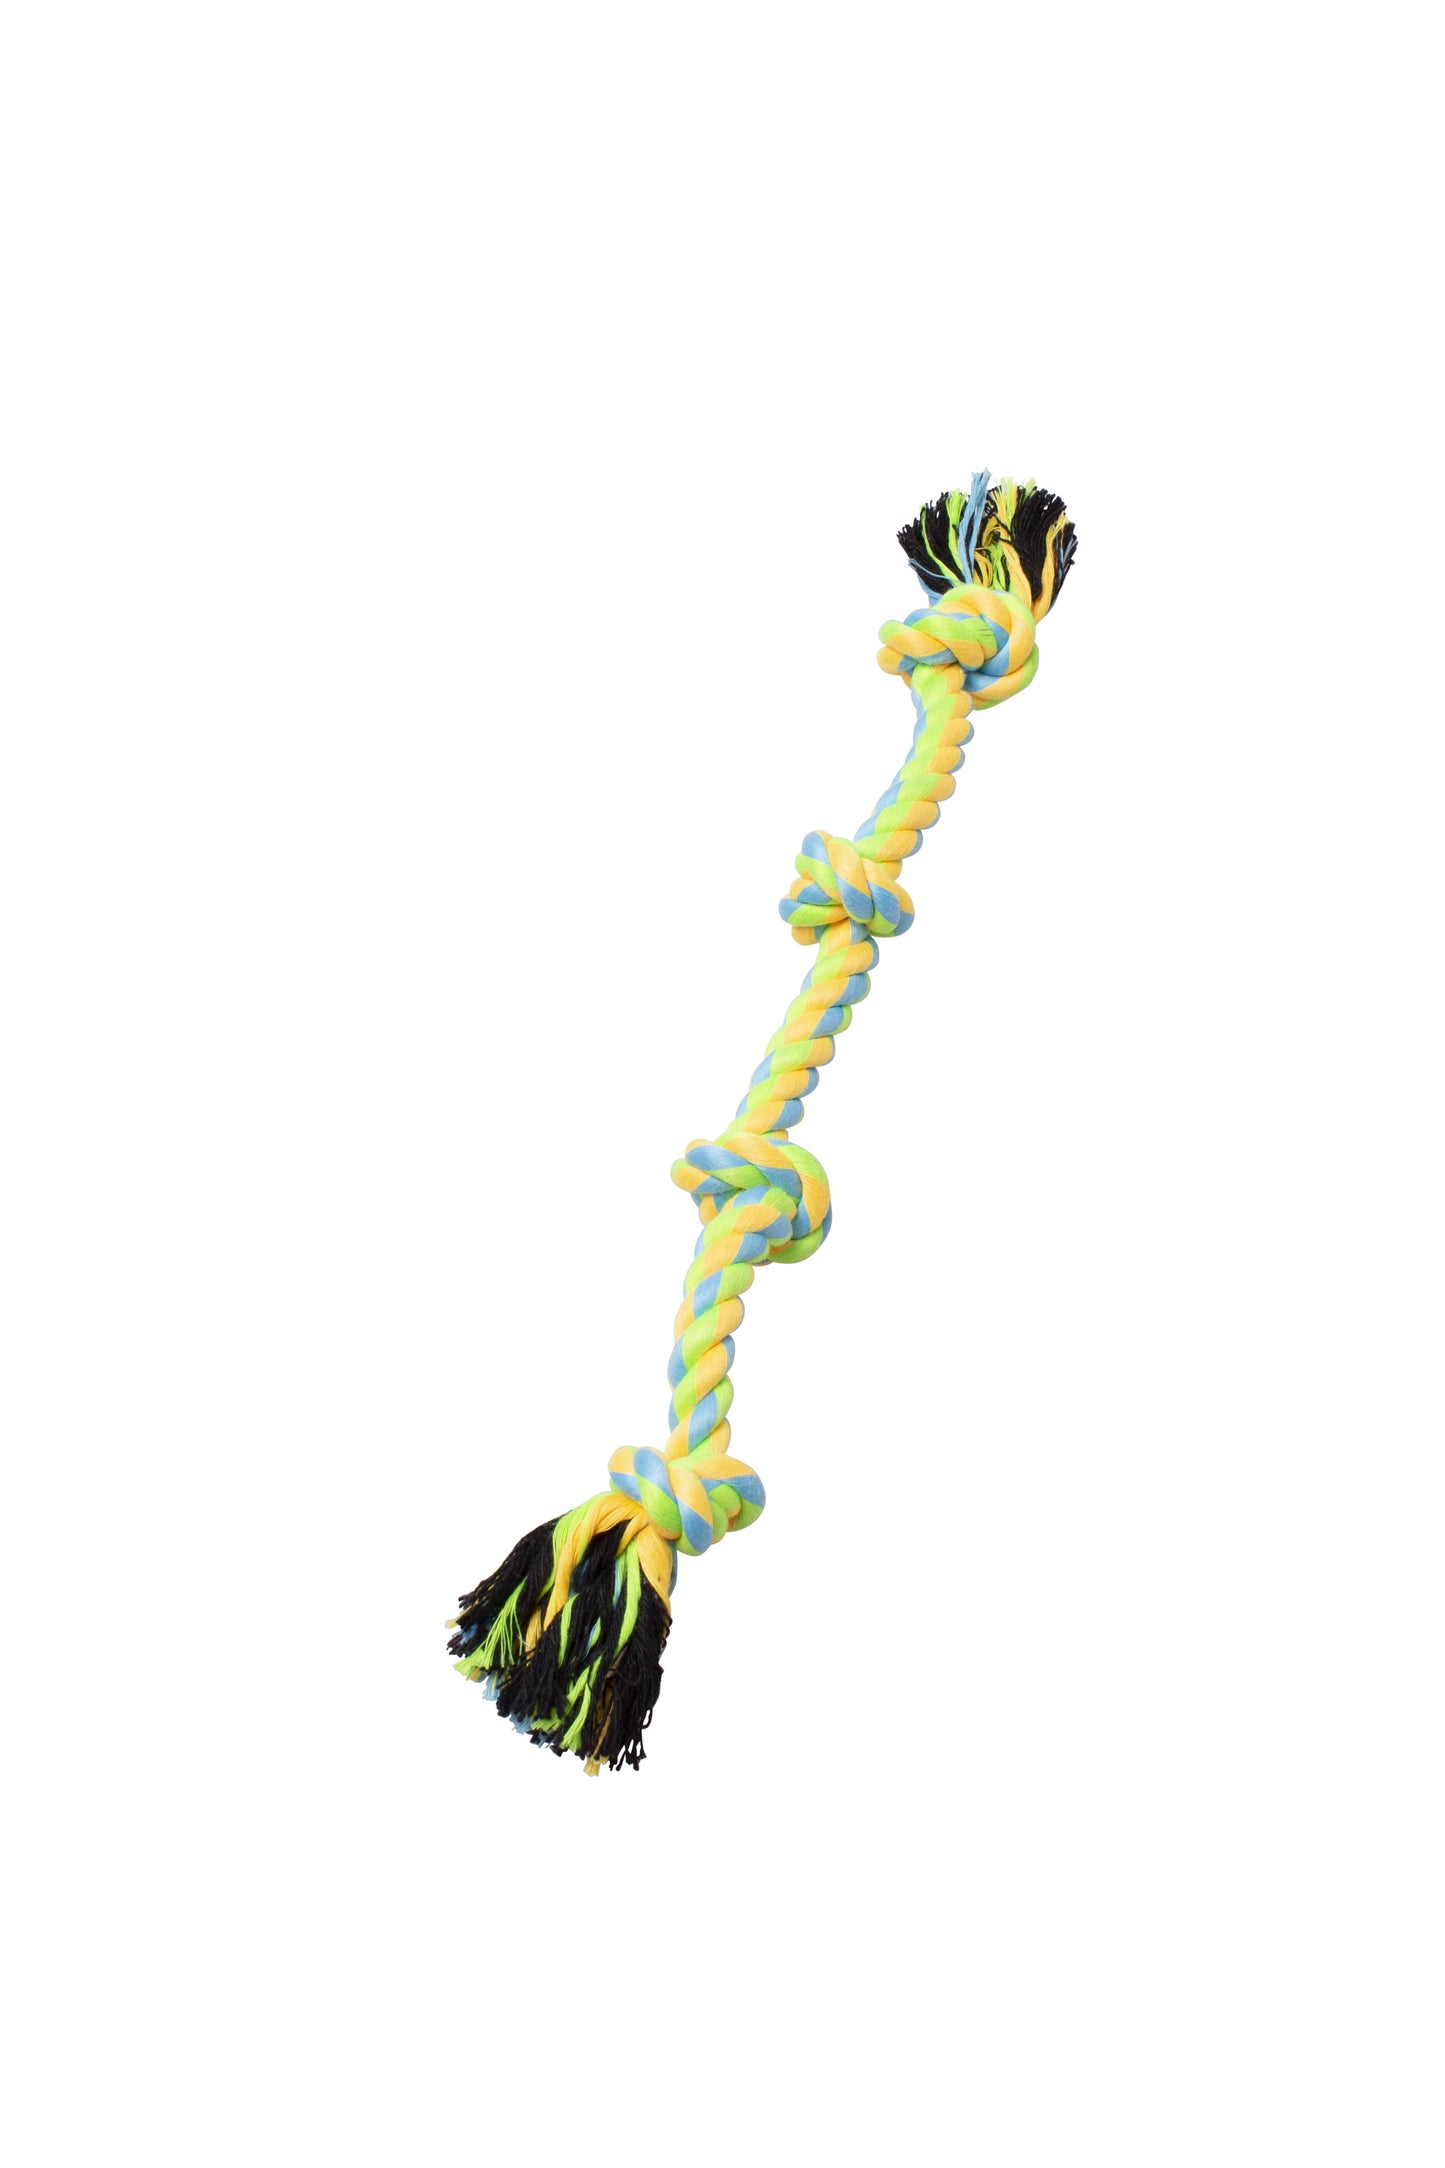 Bud'z Rope with 2 Knots Dog Toy, Green/Yellow, 40-cm (Size: 40-cm)